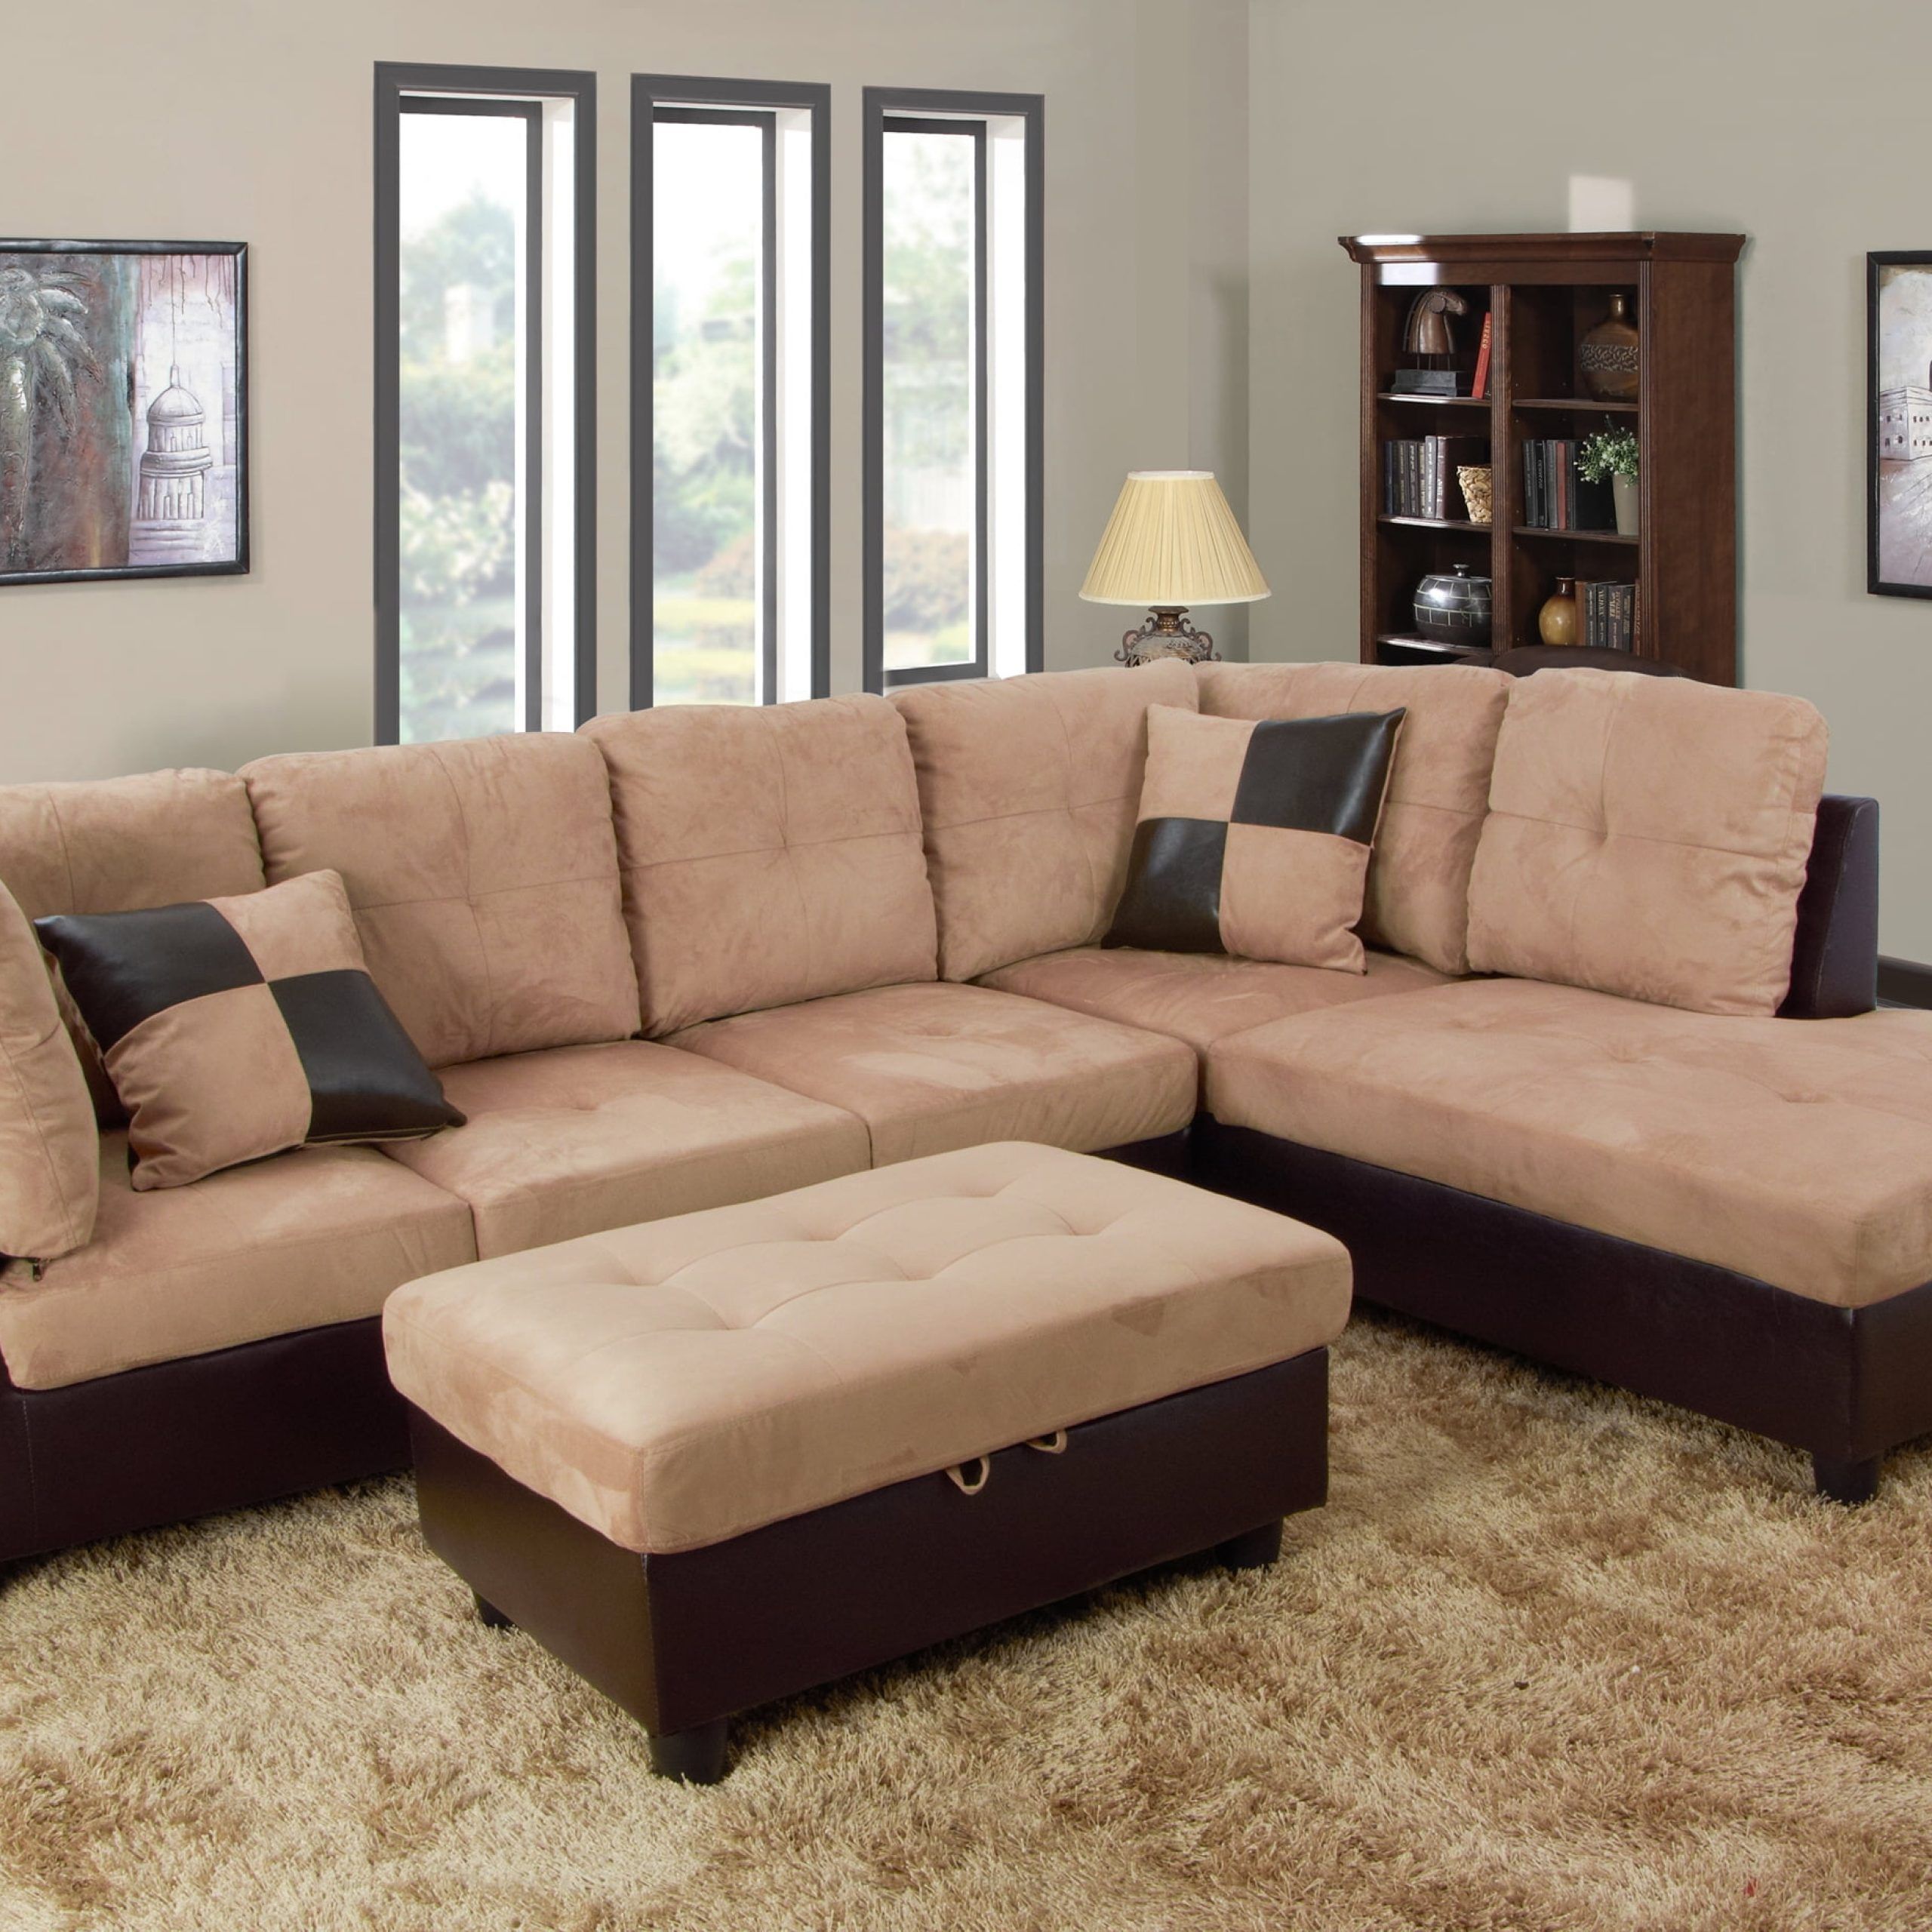 Aycp Furniture 3pcs L Shape Sectional Sofa Set, Left Hand Facing Chaise In Beige L Shaped Sectional Sofas (View 18 of 20)